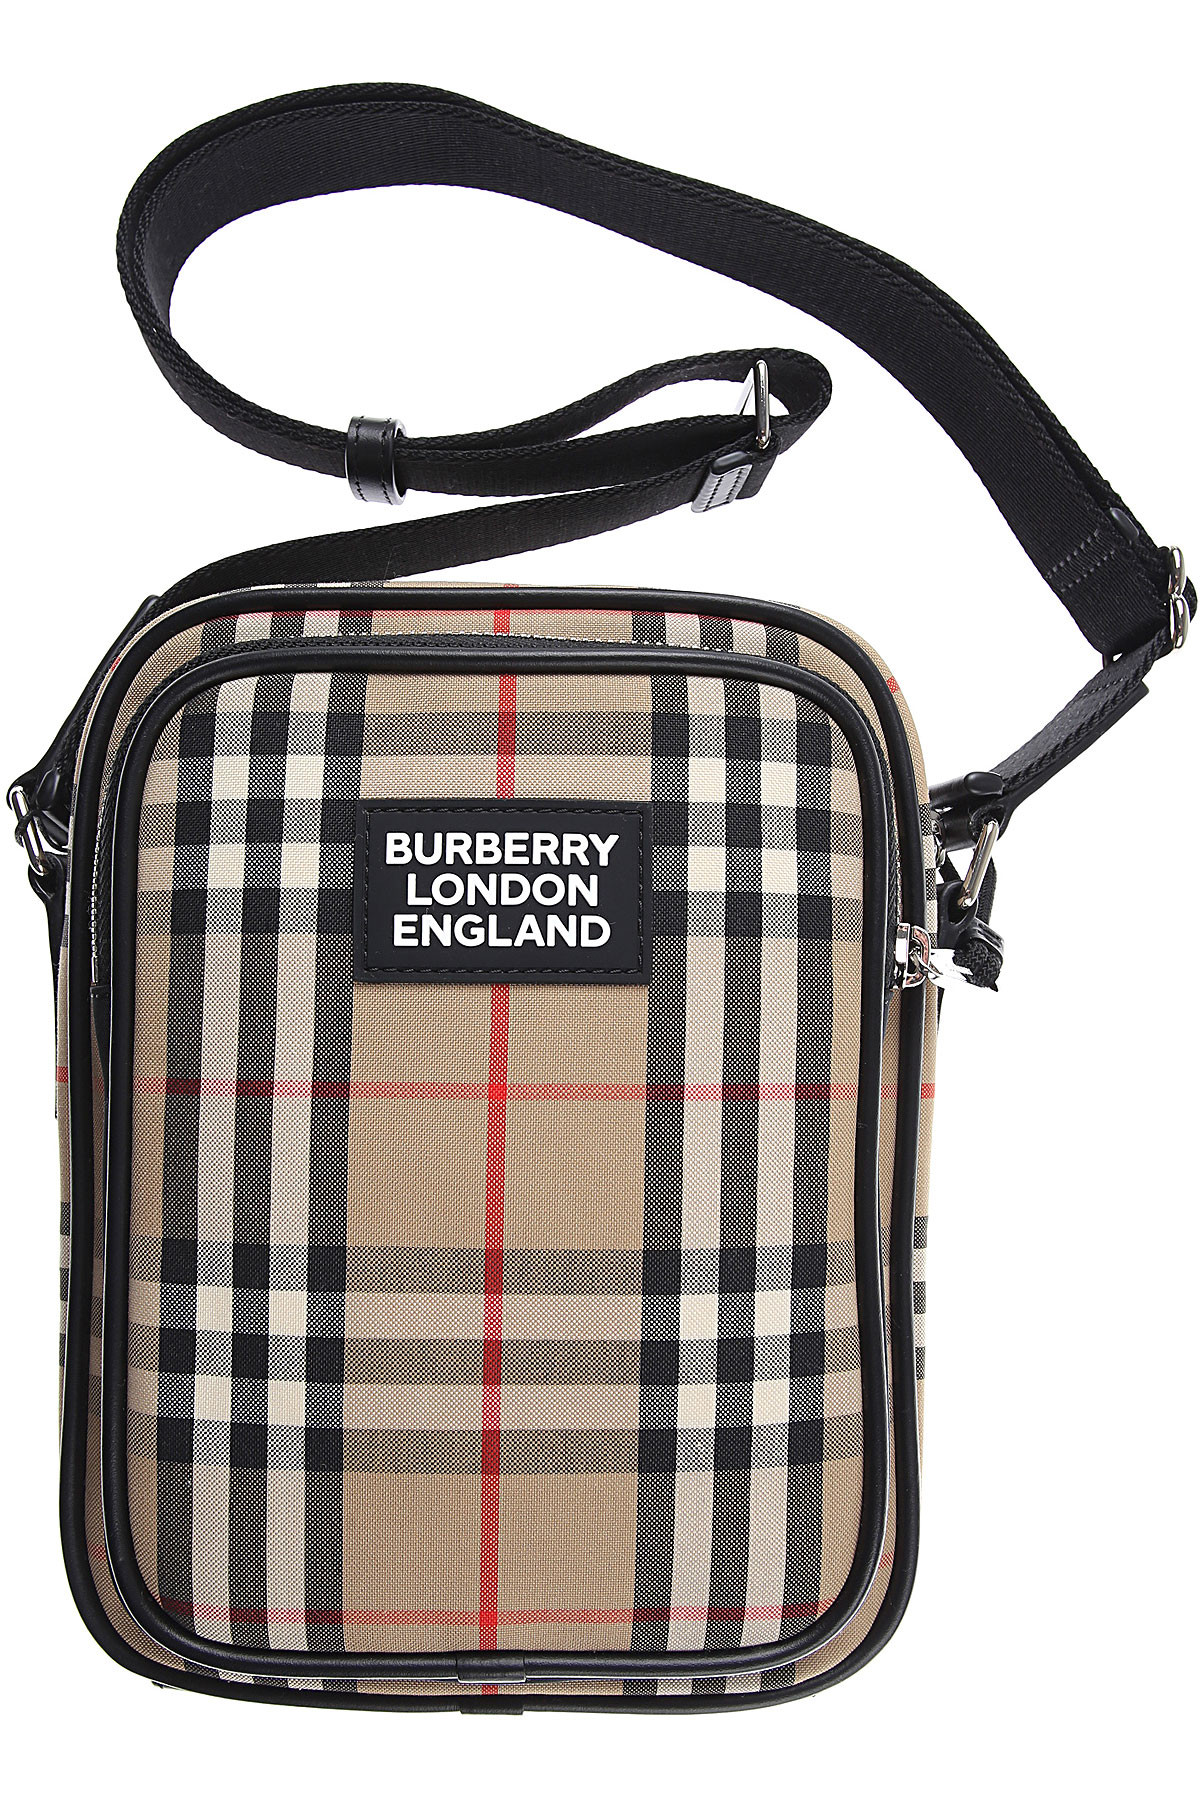 Briefcases Burberry, Style code: 8023023-a7028-